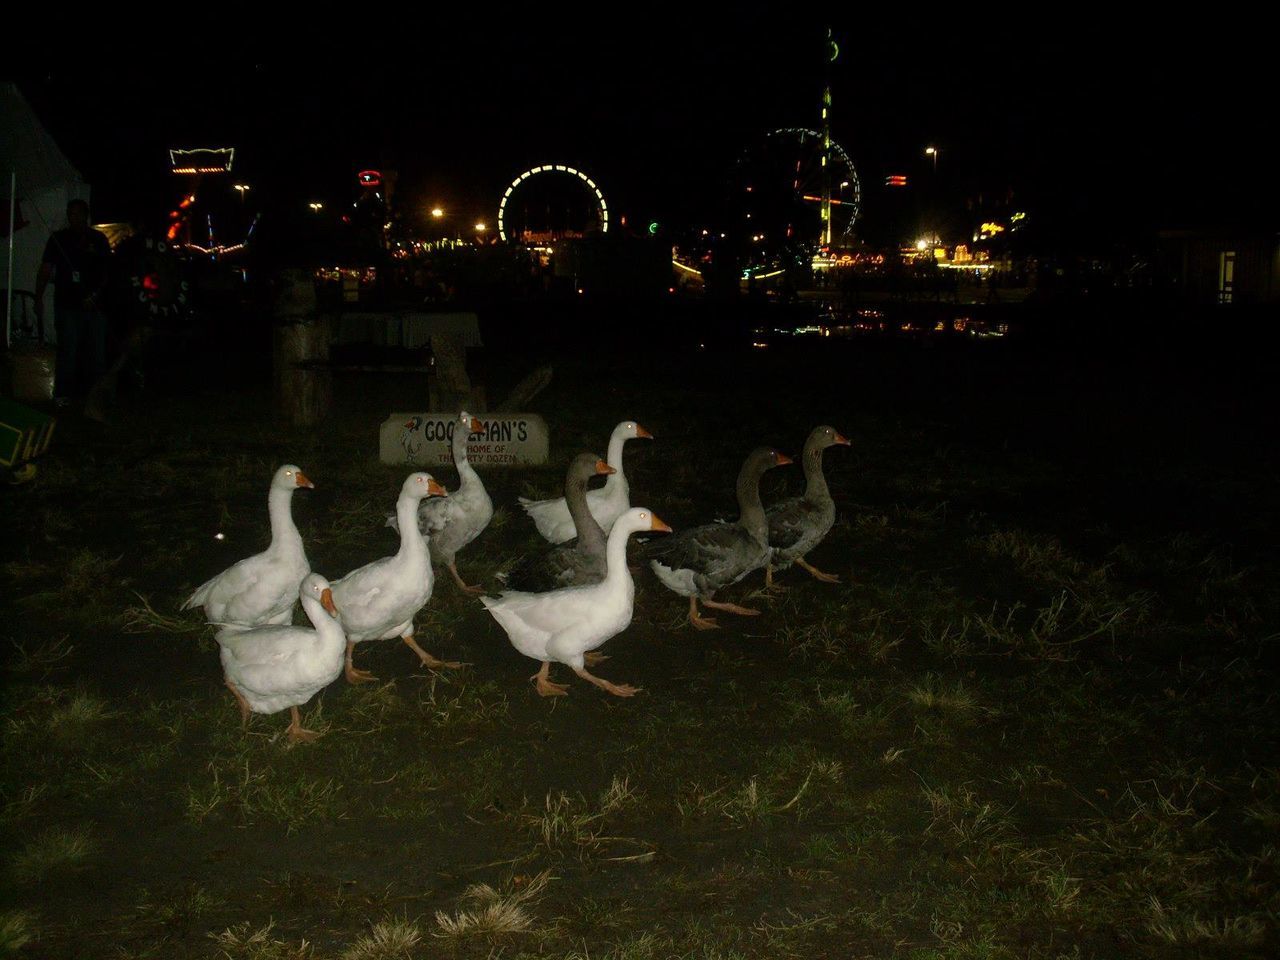 Geese on field at night